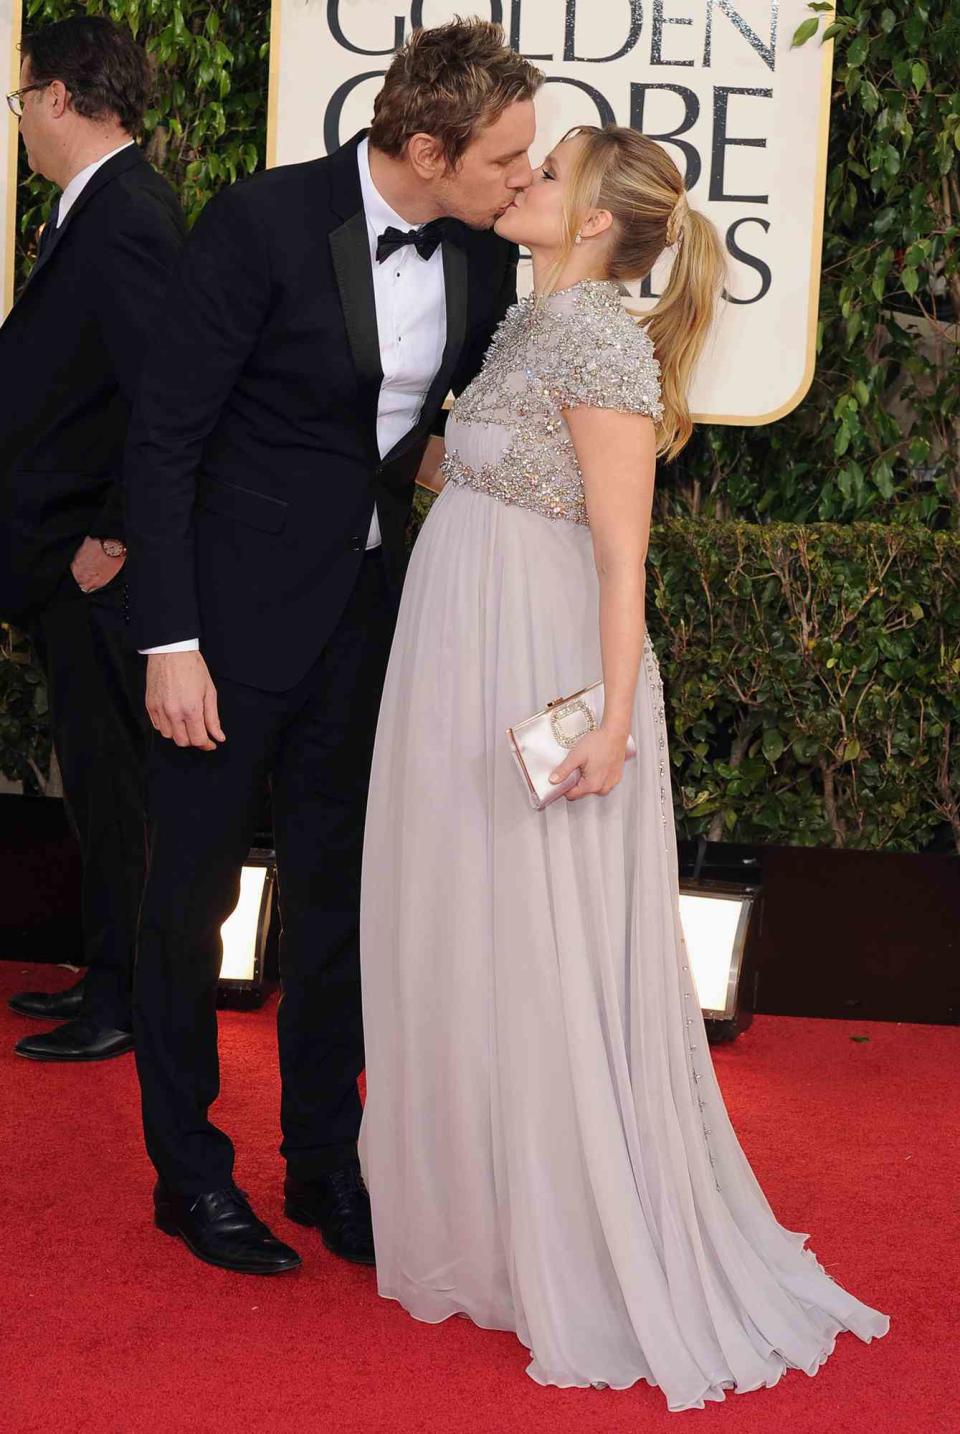 Actors Dax Shepard and Kristen Bell arrive at the 70th Annual Golden Globe Awards held at The Beverly Hilton Hotel on January 13, 2013 in Beverly Hills, California